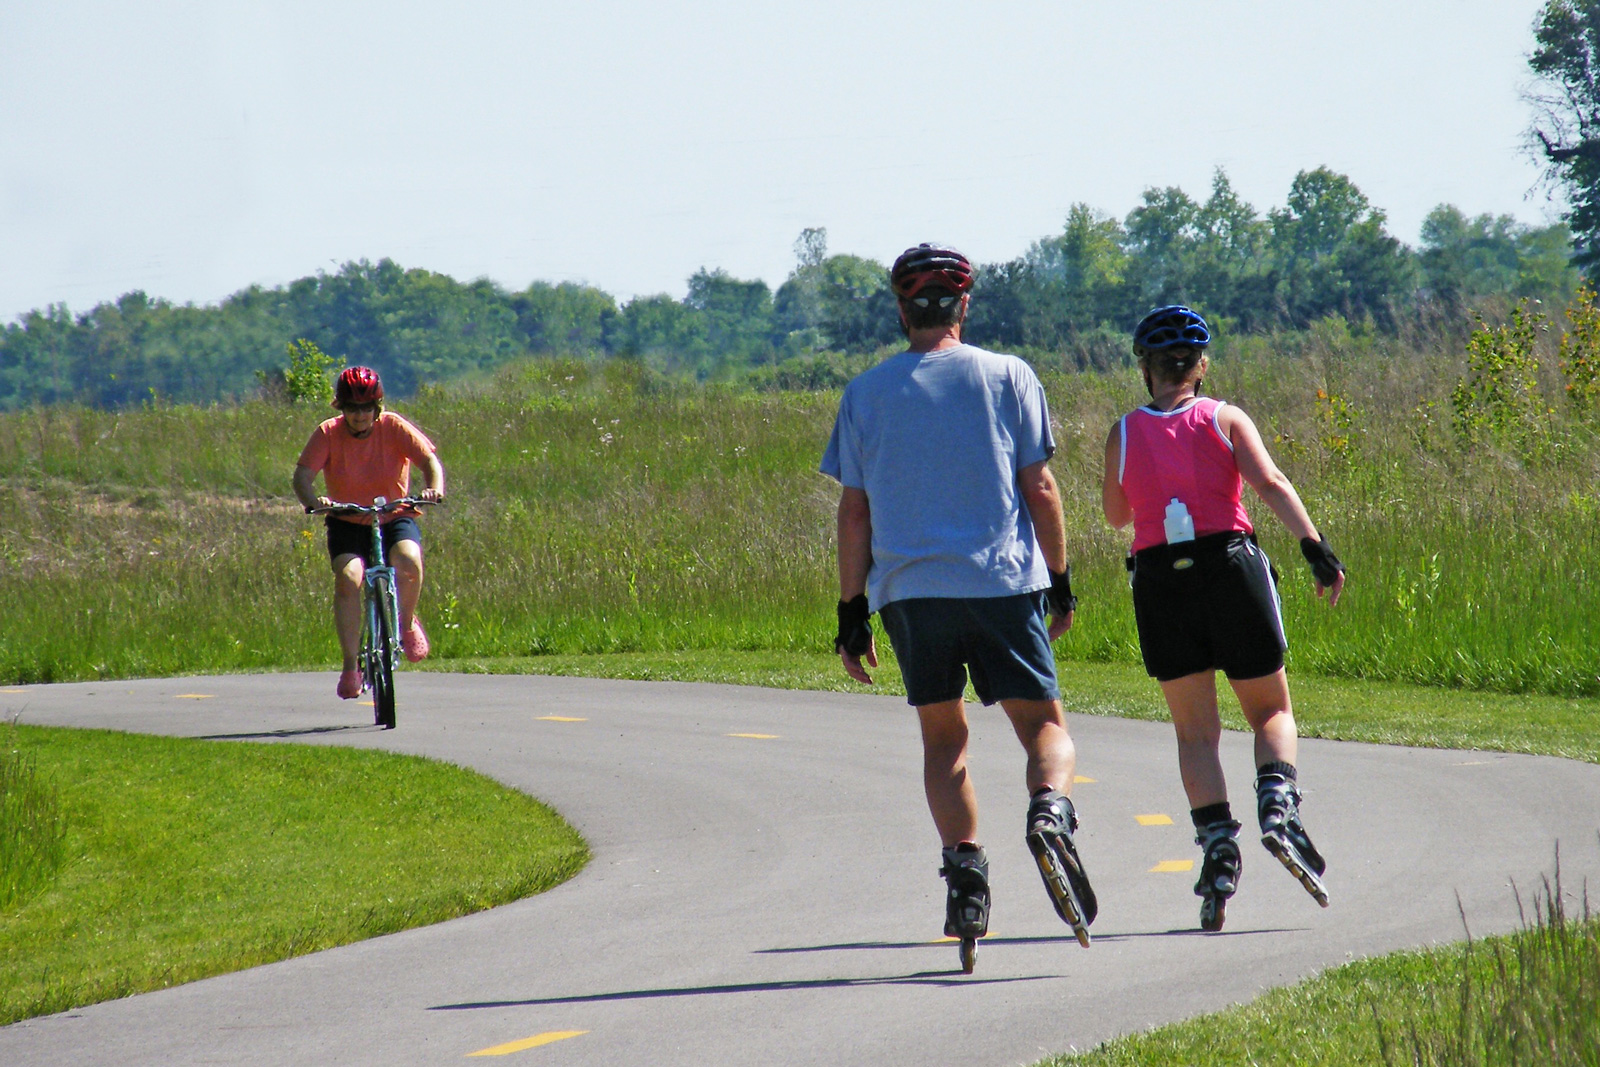 Roller-bladers and a cyclist about to pass each other on the Blacklick Creek Greenway Trail in the north west part of Pickerington Ponds.